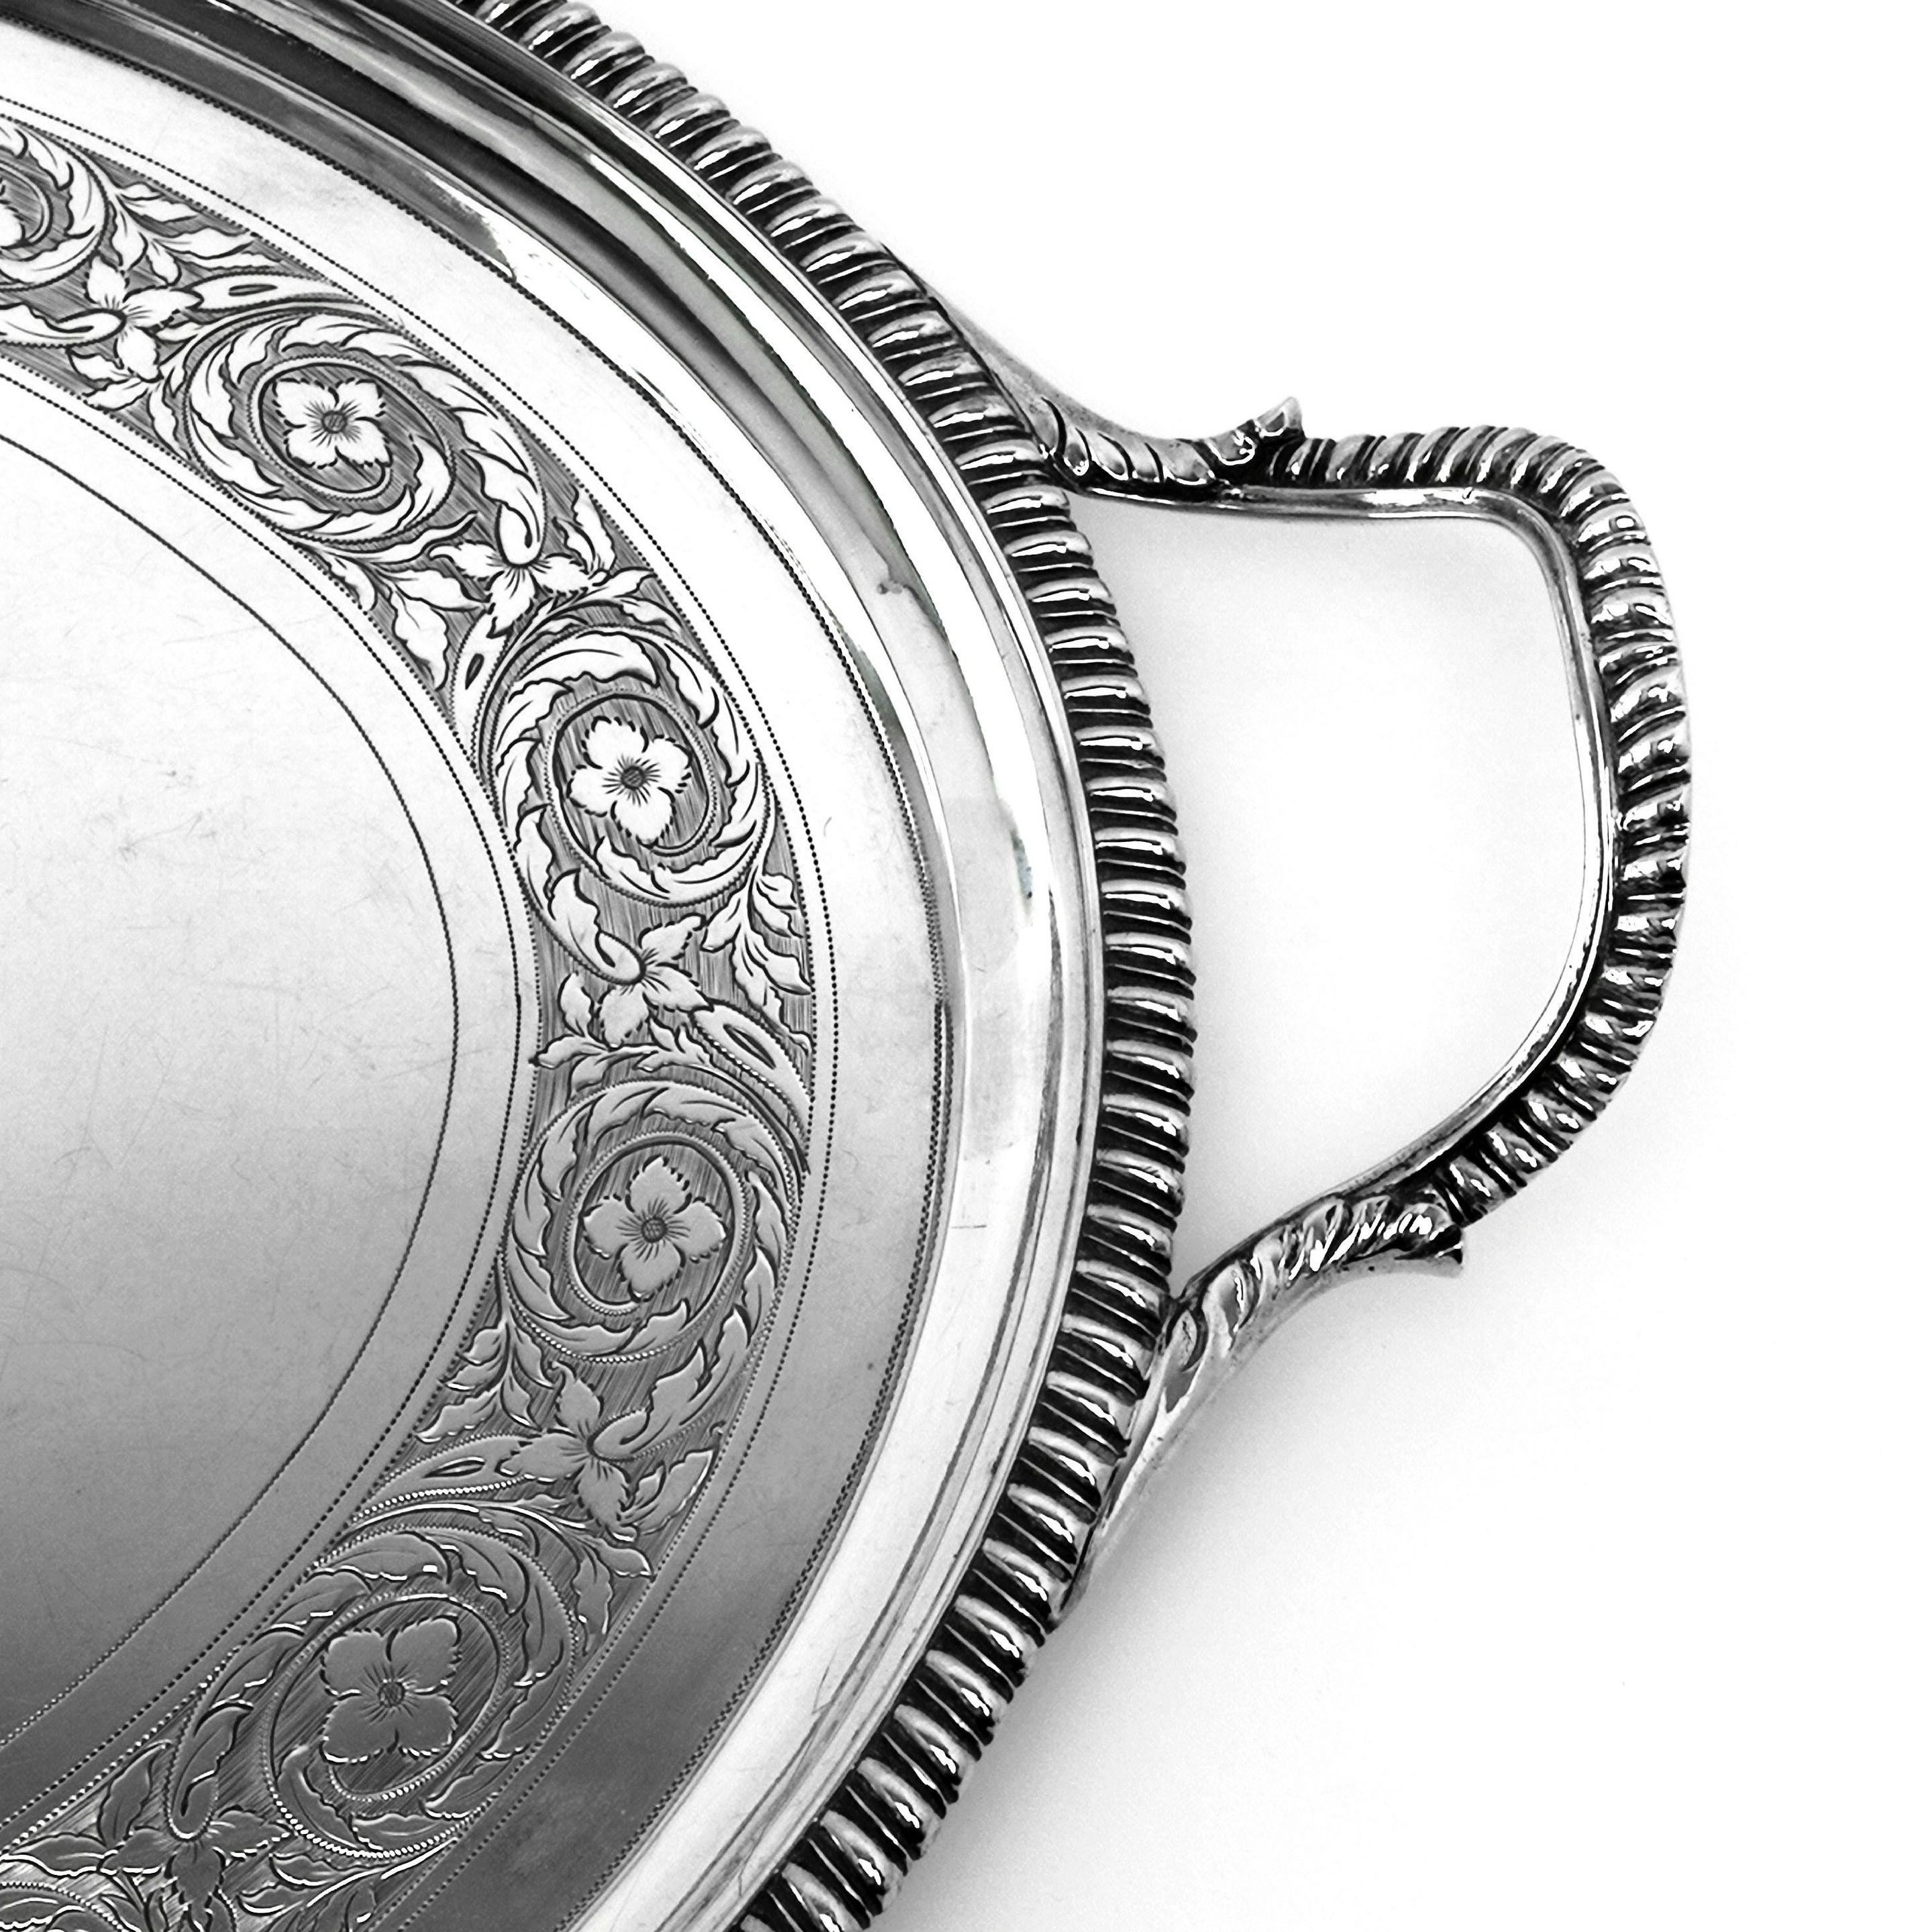 Georgian Antique George III Sterling Silver Tray / Tea Tray / Serving Tray 1804